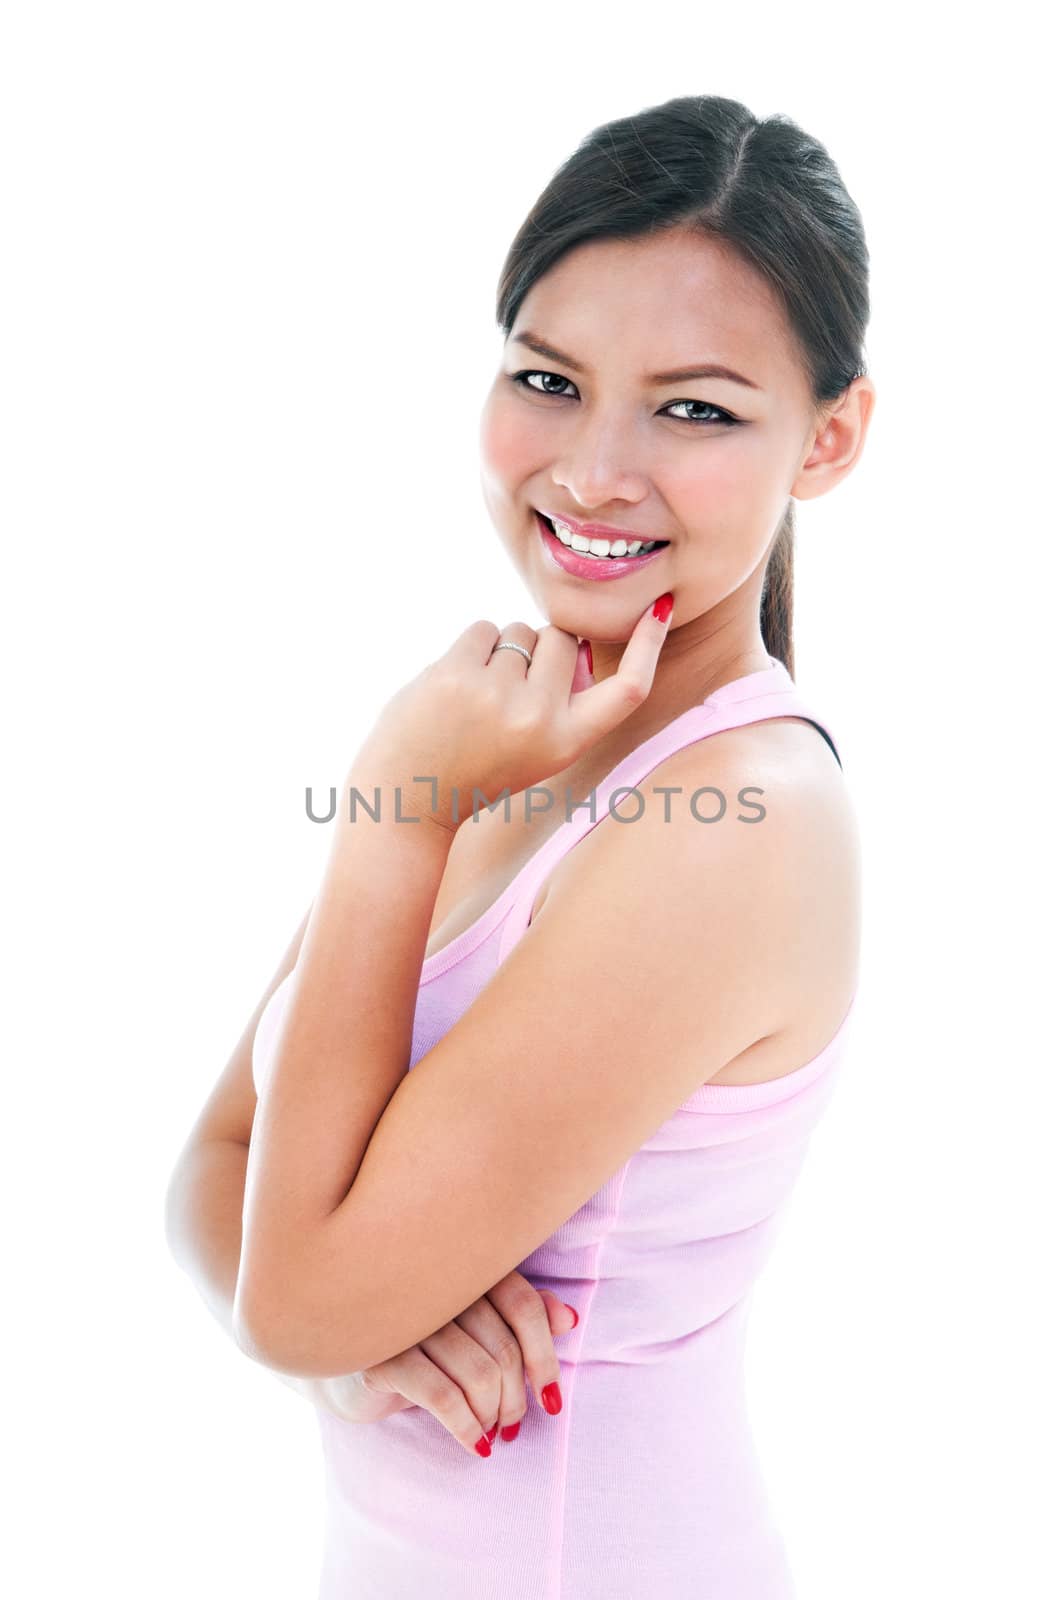 Young beautiful woman smiling over white background